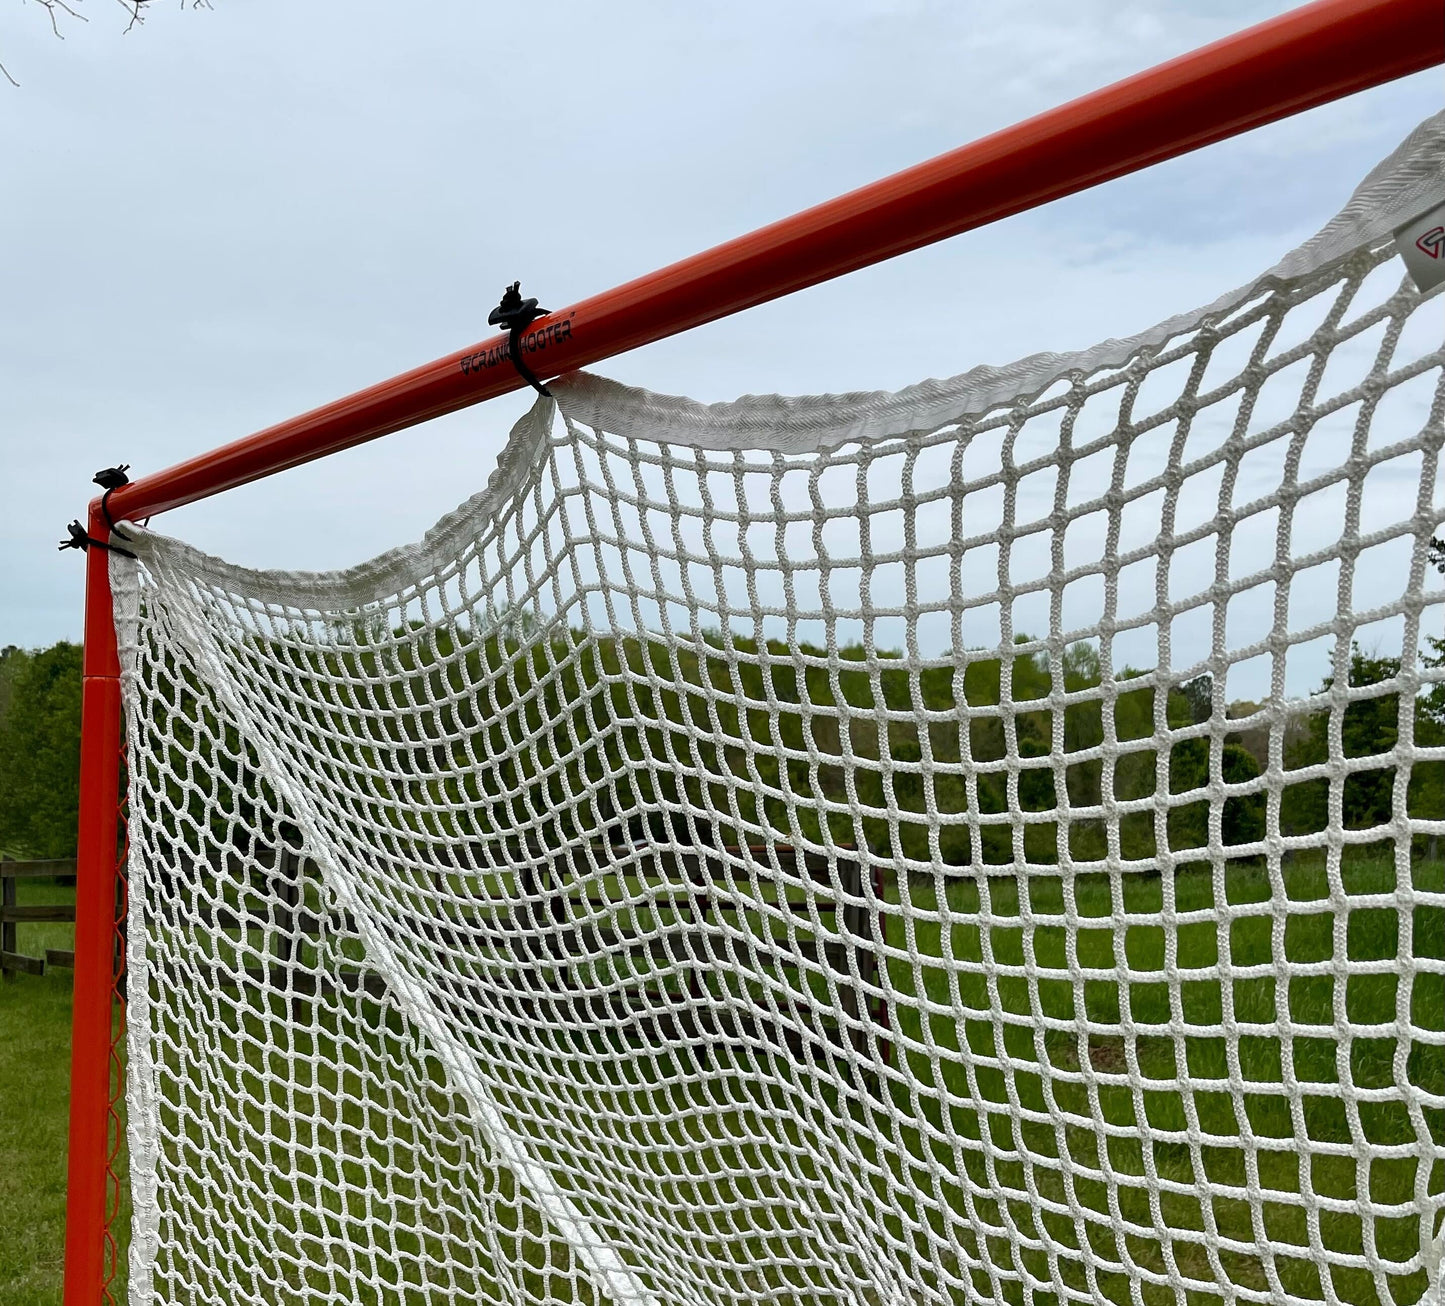 Pair (2x) of High School Practice Goals 6'x6'x7' by Crankshooter® Choice of 6mm White or Black Nets, Posts w/ Lacing Rails, 59 lbs. Each - Free Shipping